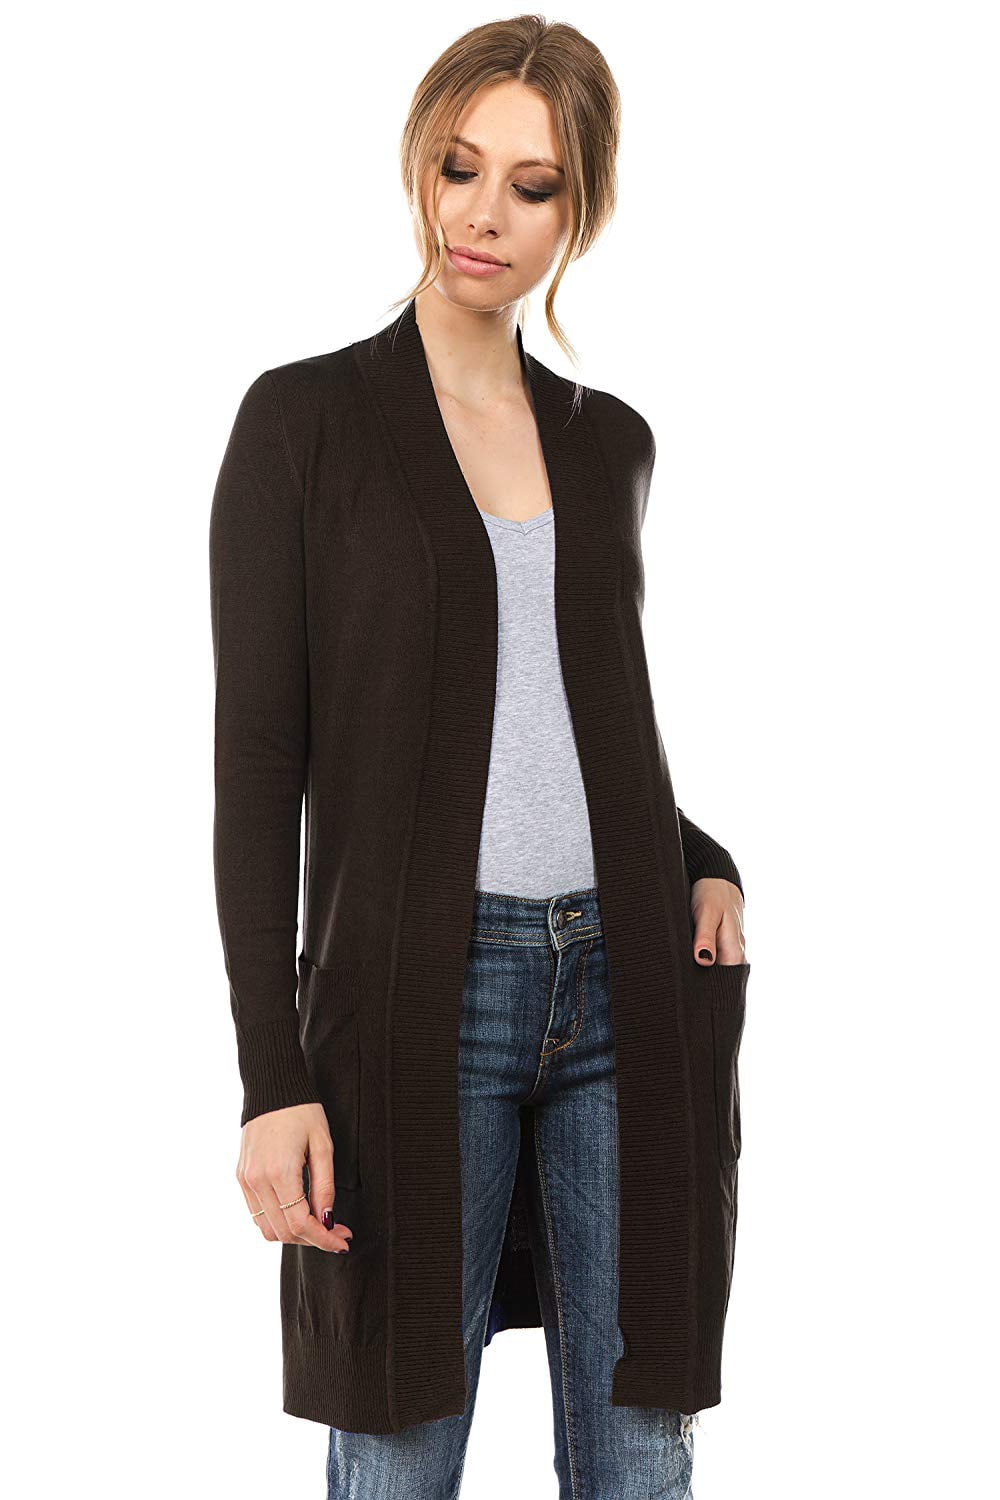 Enimay - Women's Long Sleeve Sweater Duster Cardigan Brown Size Small